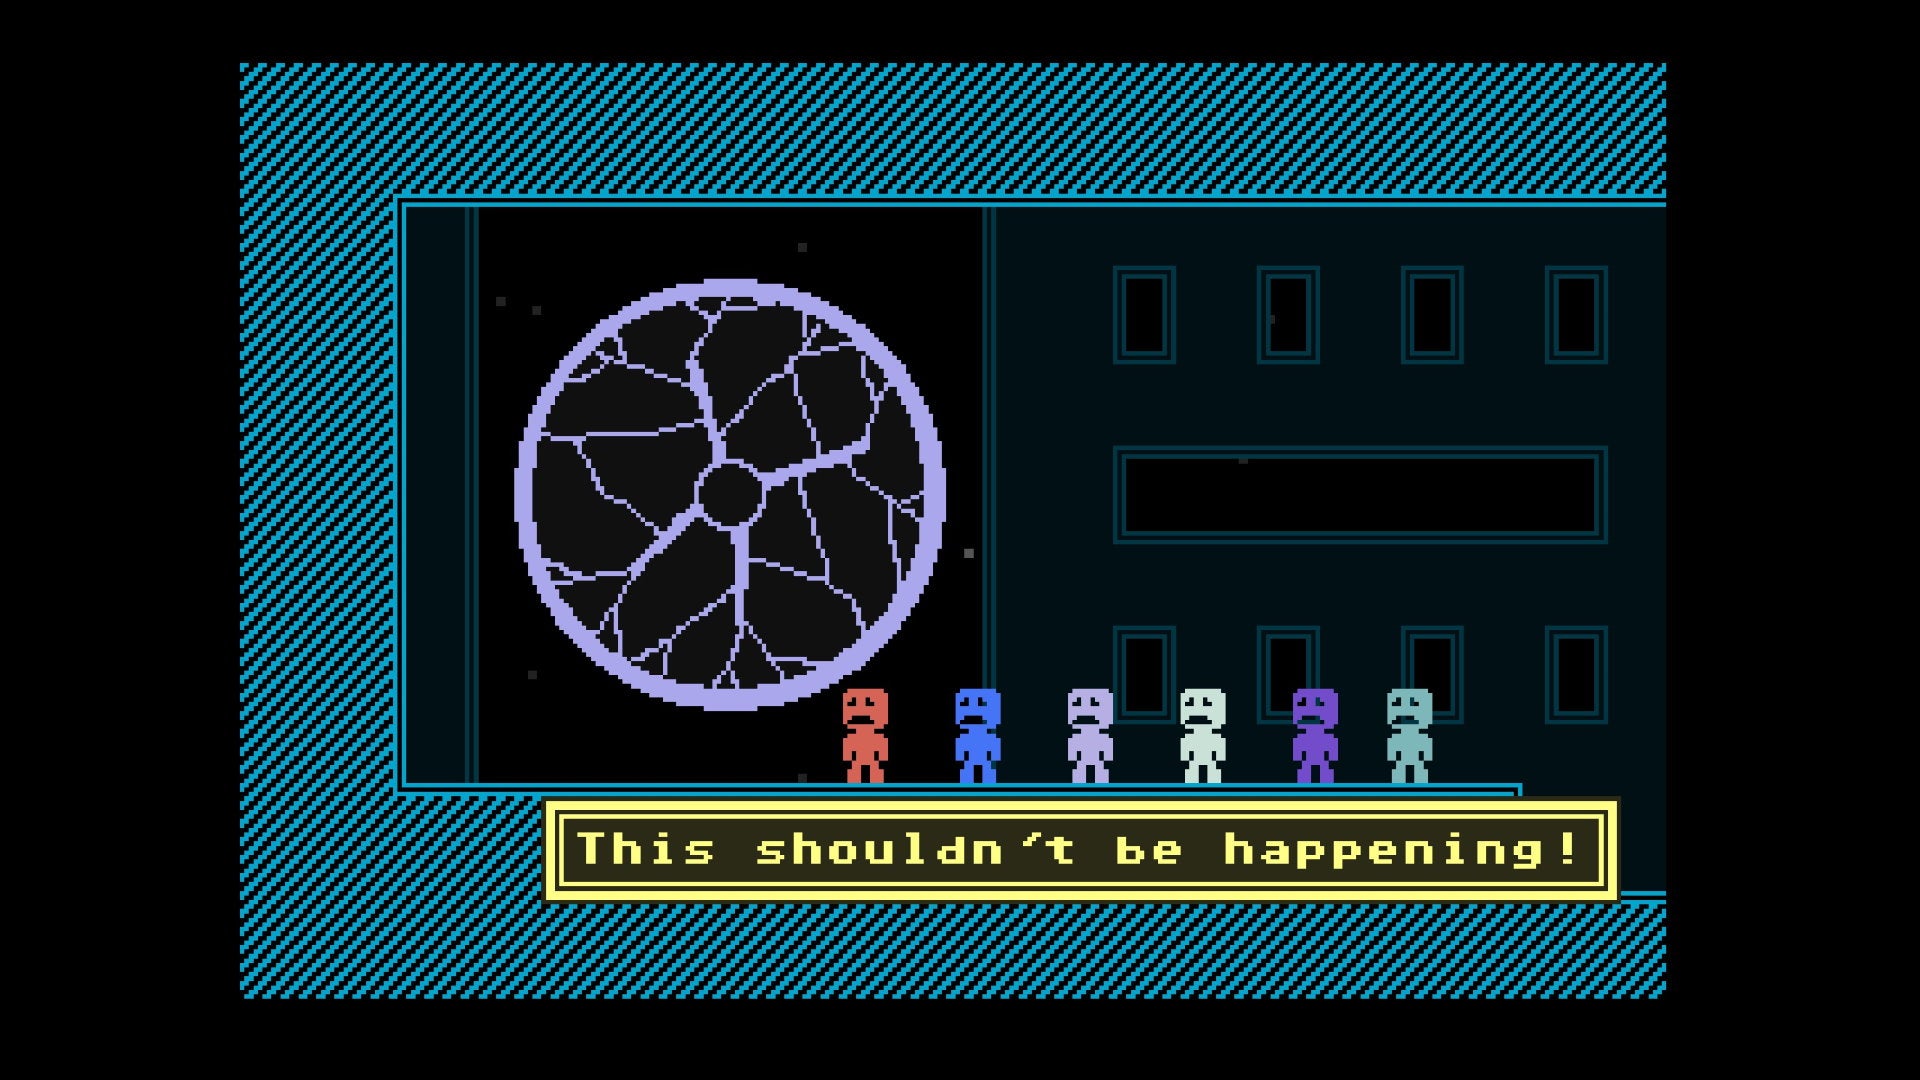 Six pixel people stand in front of a teleporter in VVVVVV